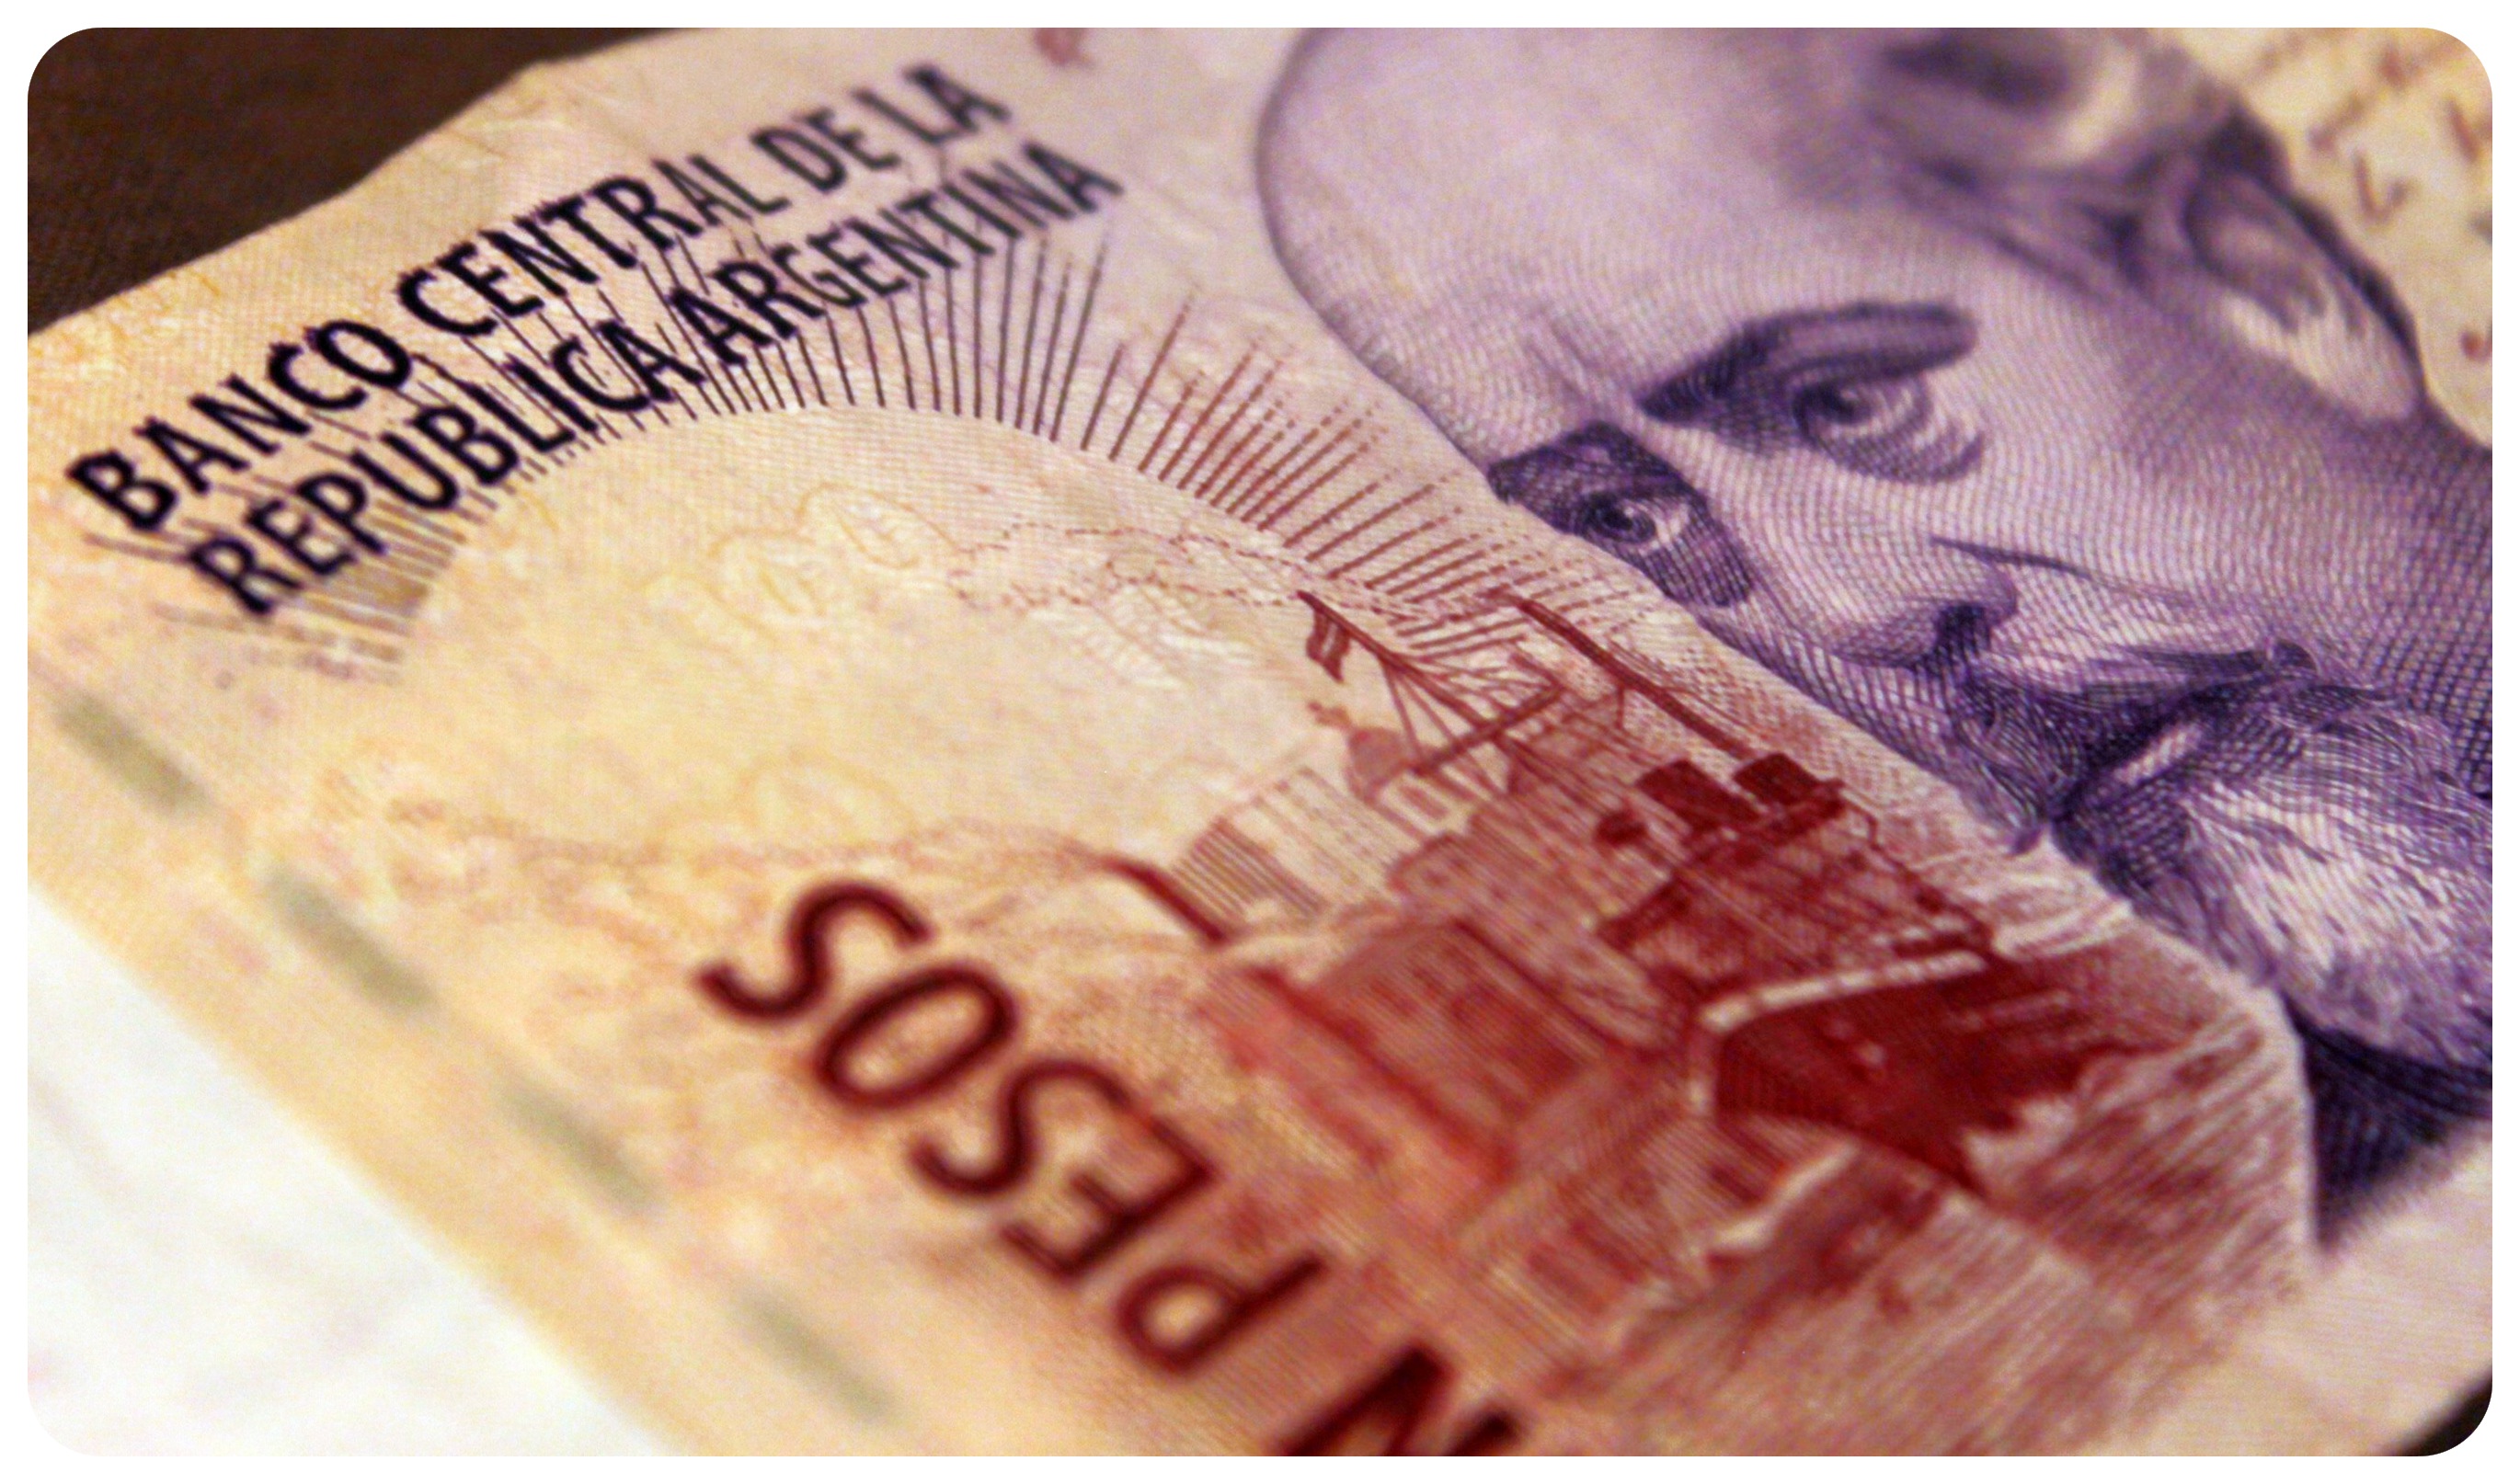 Argentine Peso Backgrounds, Compatible - PC, Mobile, Gadgets| 2740x1614 px